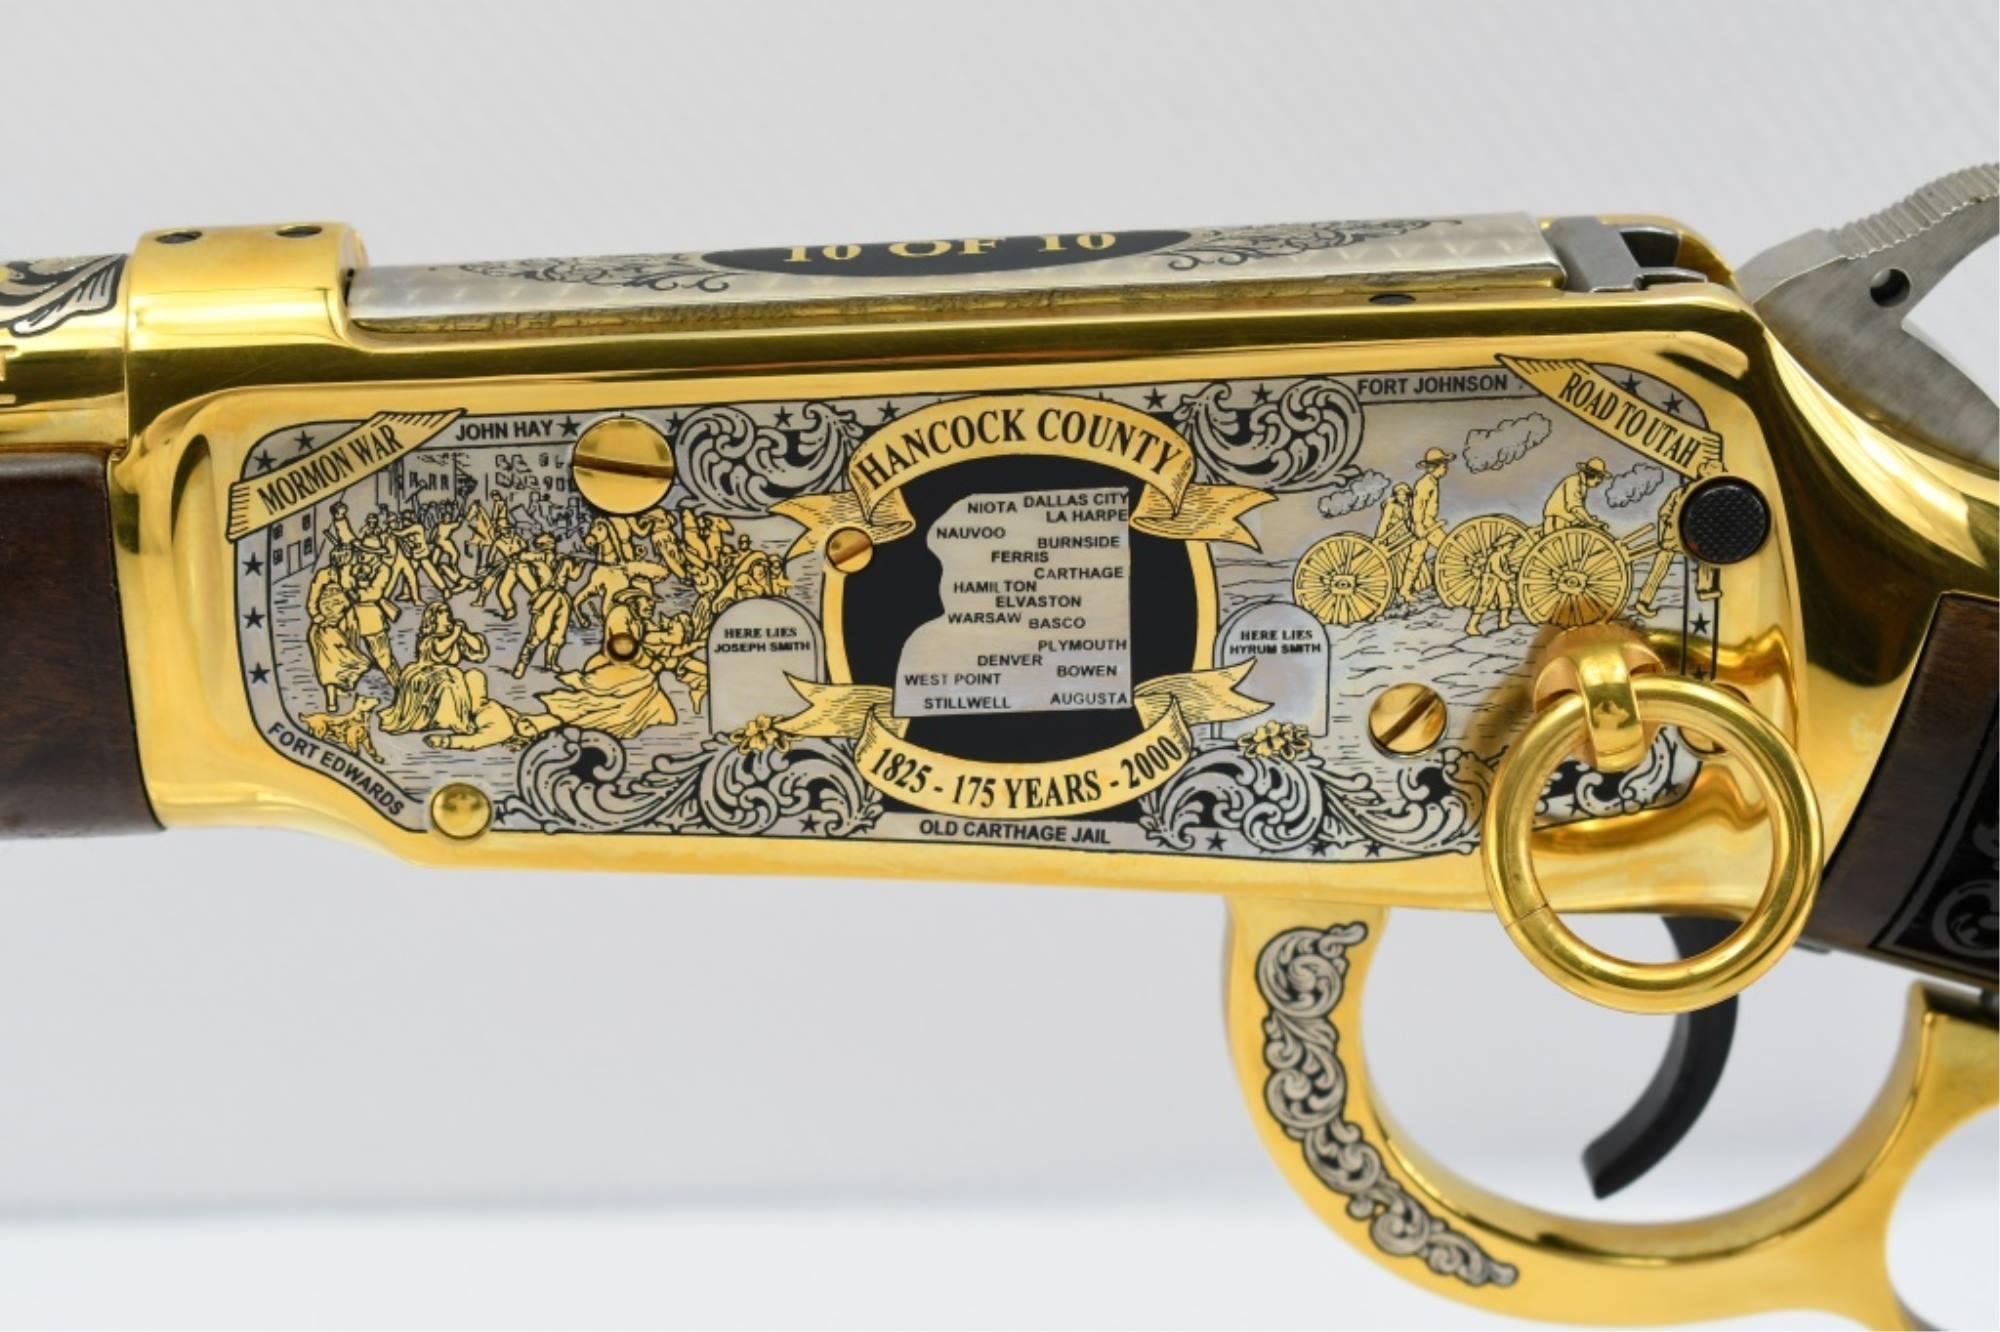 Winchester, 94AE, 45 Colt Cal., Lever-Action - Hancock Co. IL - Engraved 24K Gold - SN - 6371950